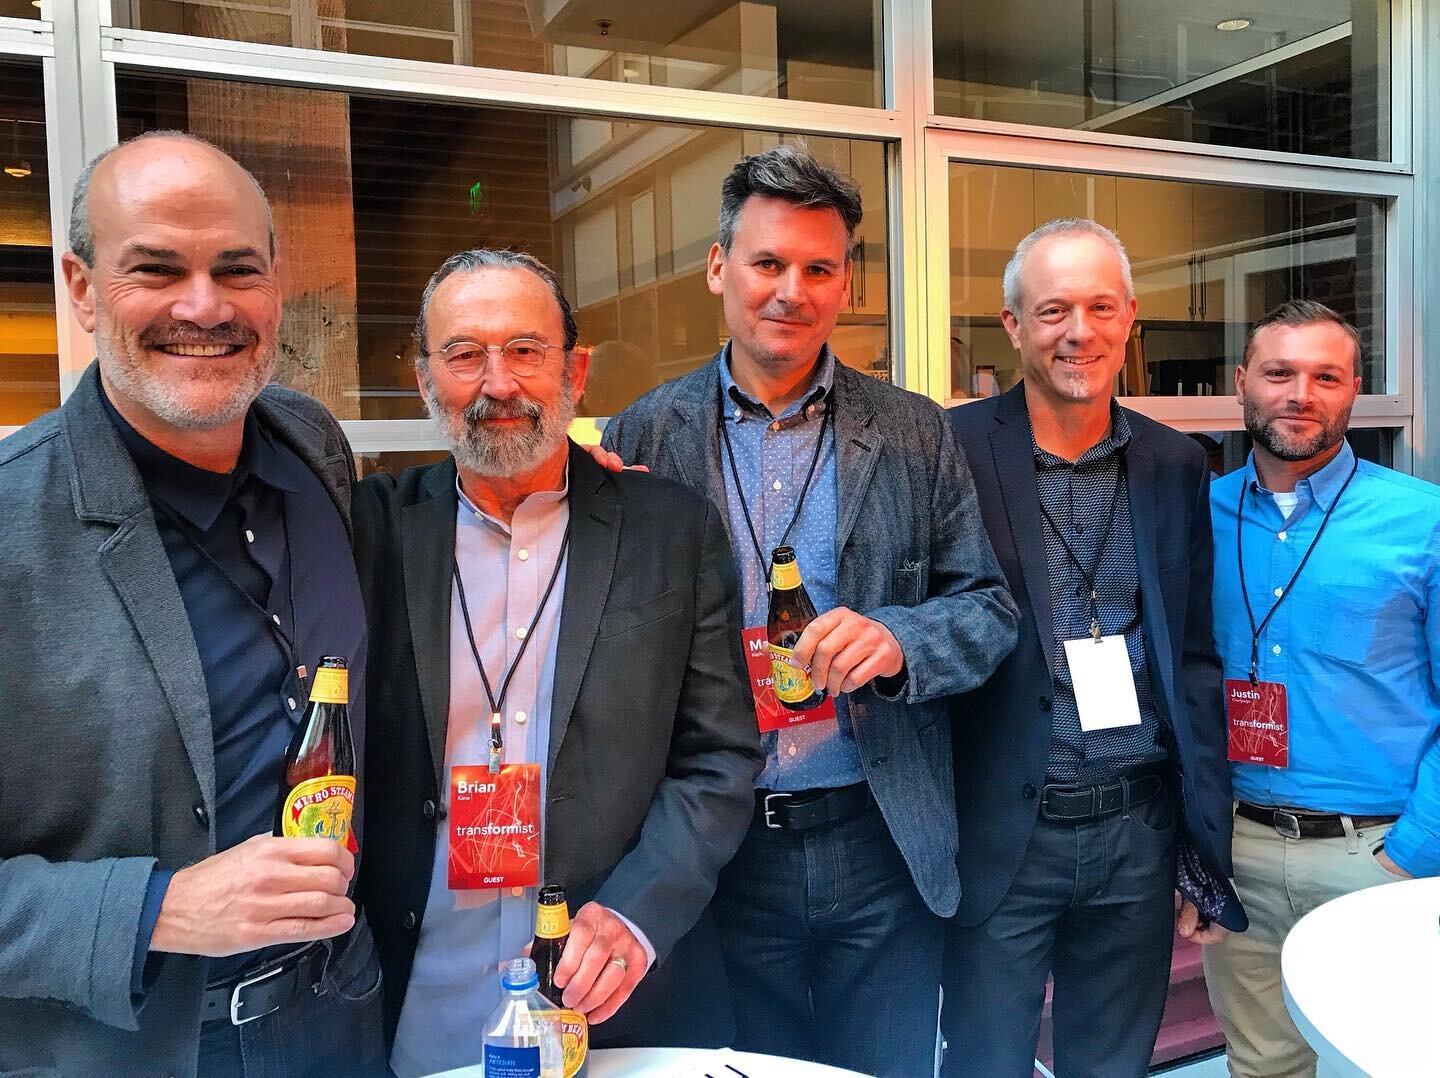 Can it really be four years since we all were together celebrating &ldquo;The Metro Effect&rdquo; at @oneworkplace in San Francisco?  Lots of memories, anecdotes and, of course Anchor Steam 🍻 
✏️ Brian Kane
✏️ Mark Kapka
✏️ Jess Sorel
✏️ Justin Cham